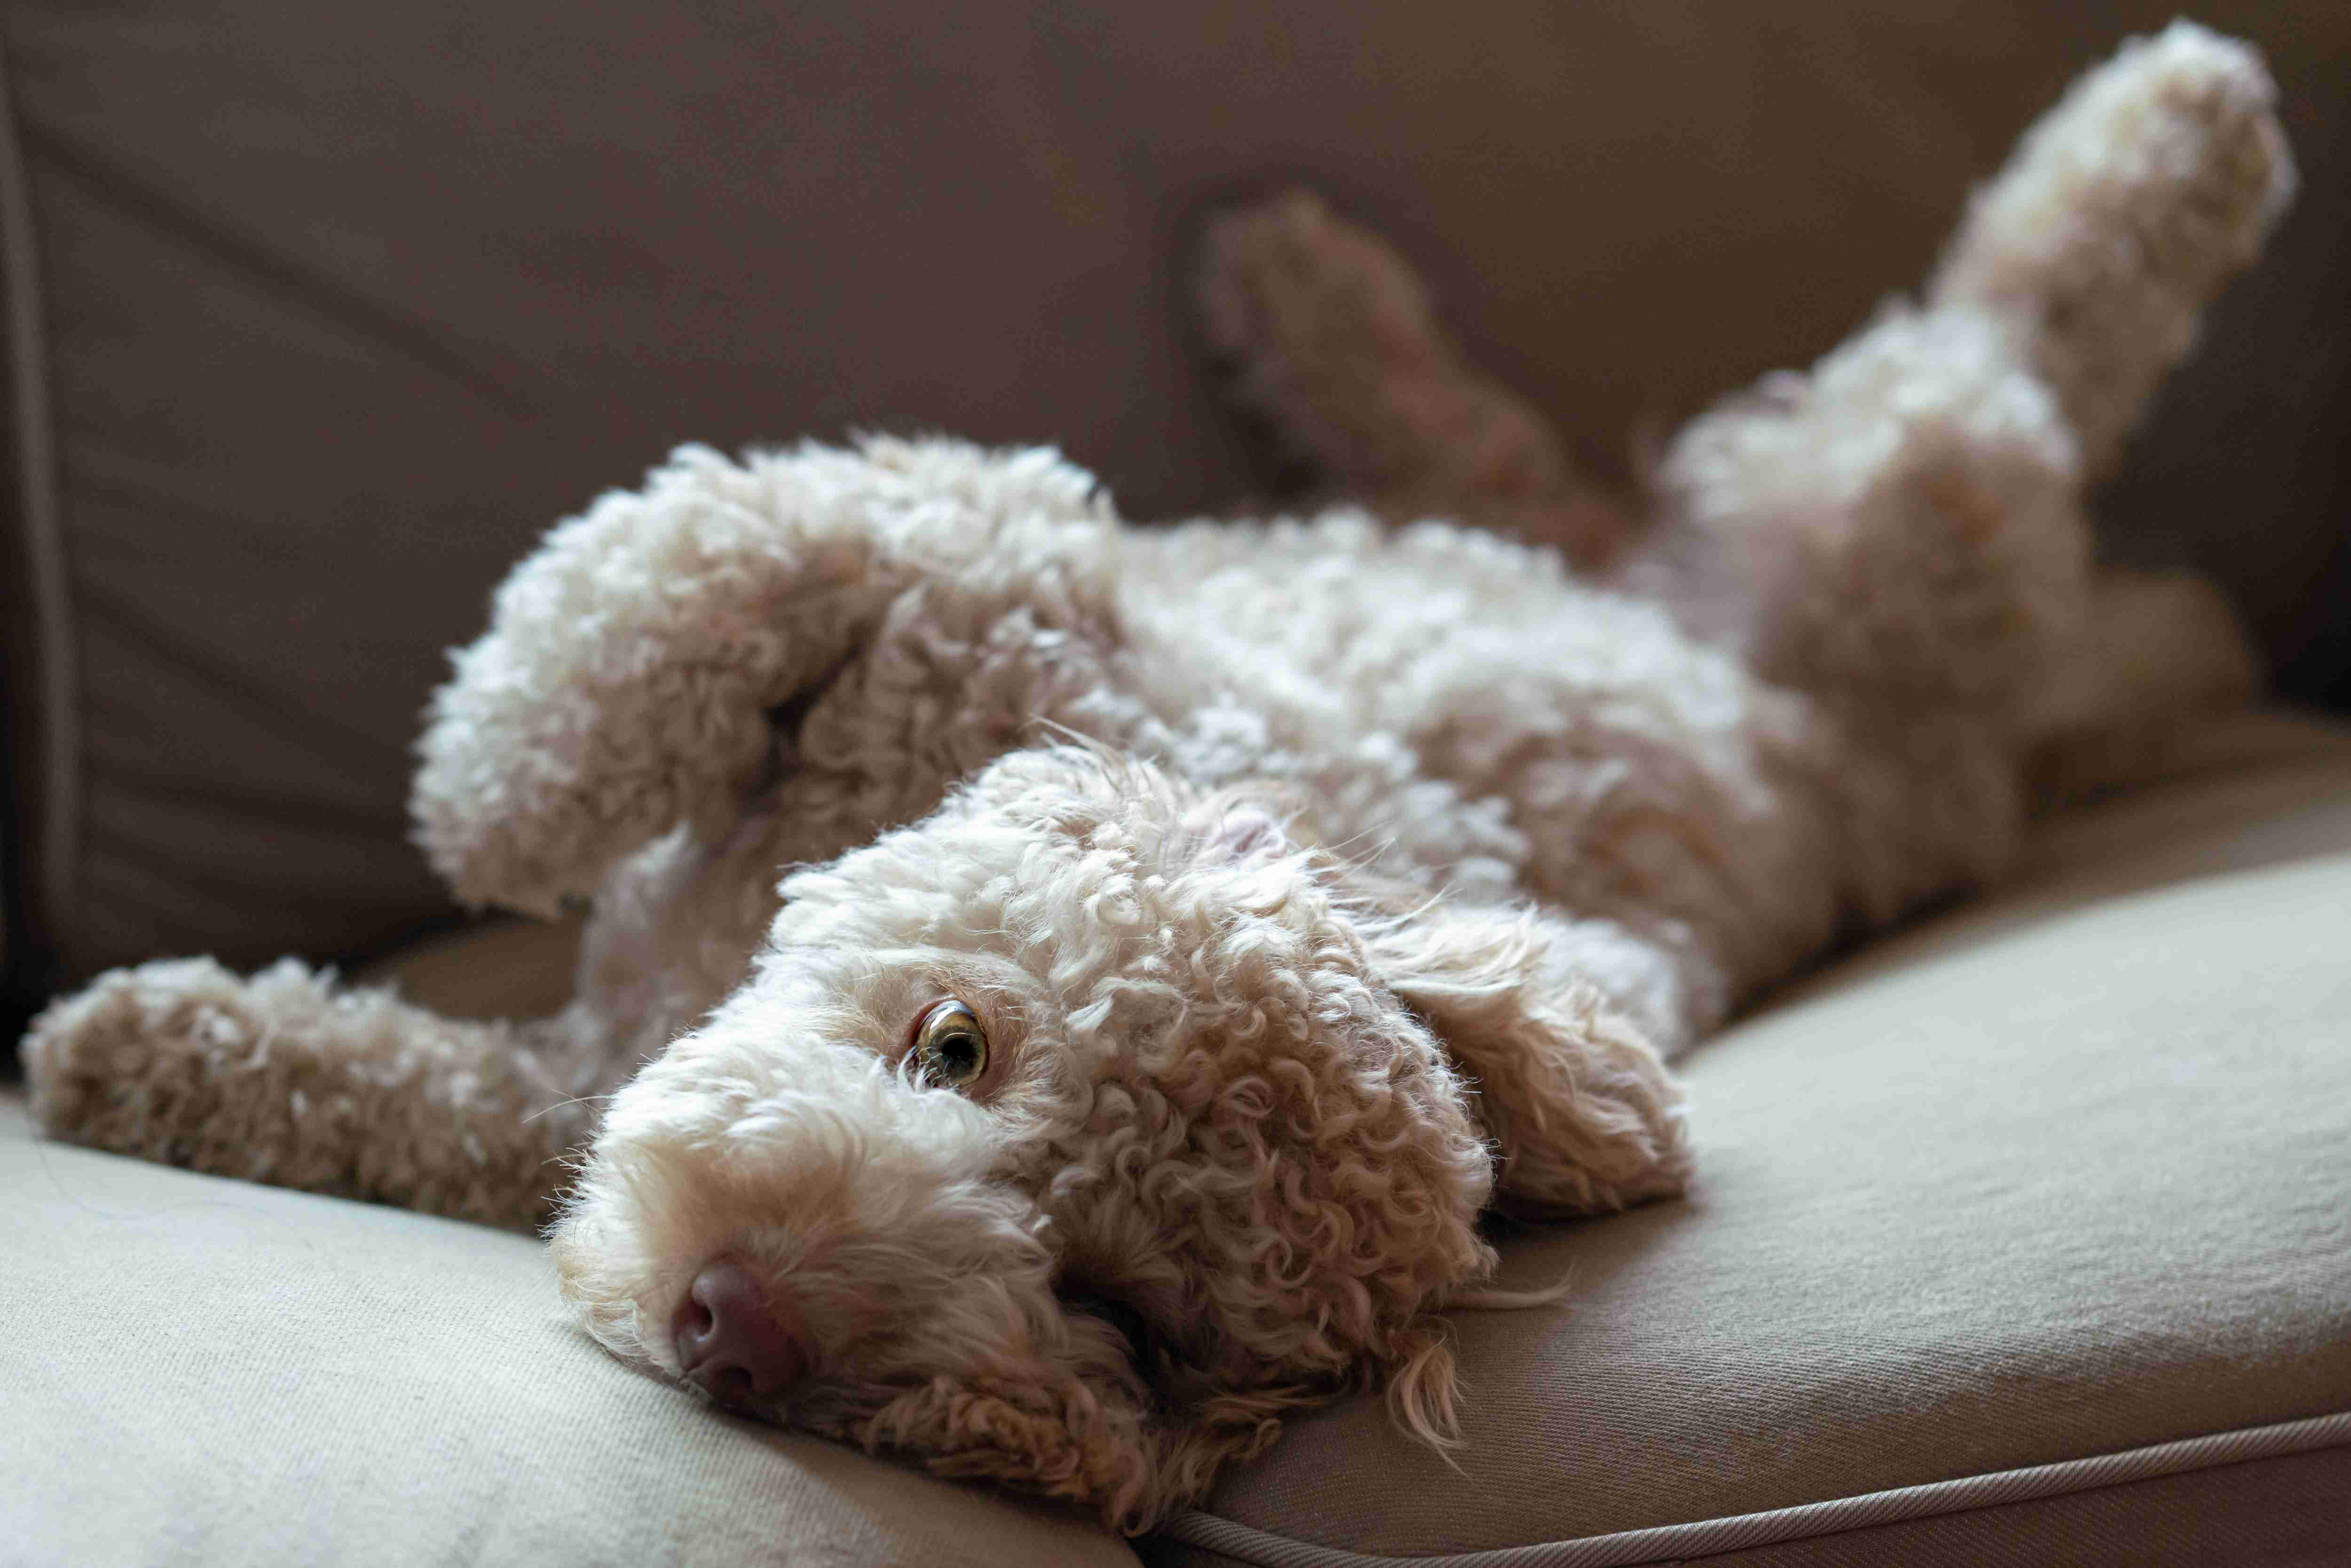 Did you encounter any challenges with your Poodle puppy's energy level and exercise needs?